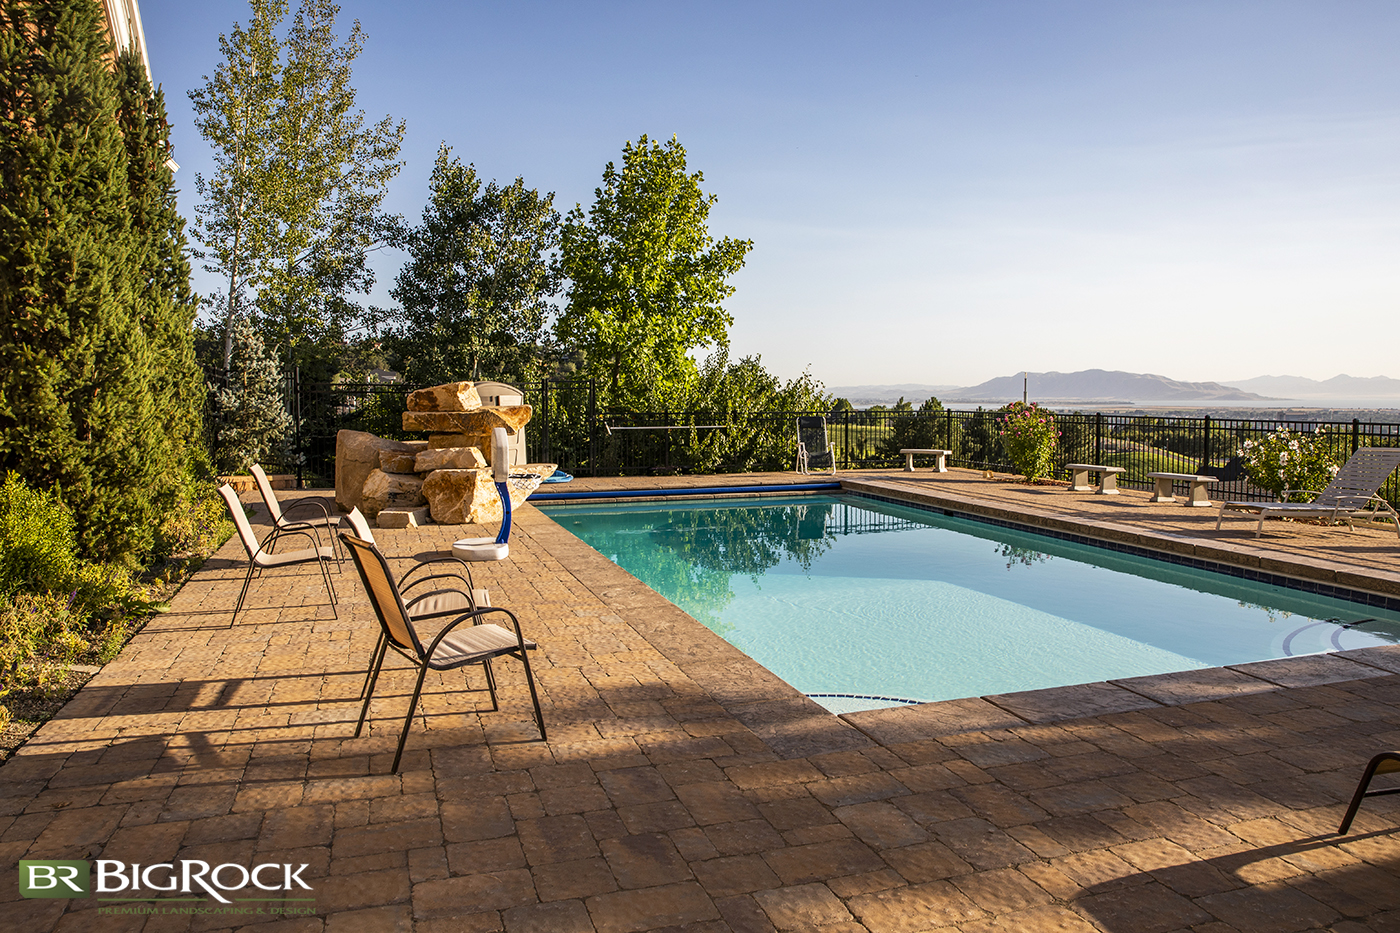 Adding a pool into your backyard is a big undertaking and Big Rock Landscaping is the pool contractor of choice. We will share our best pool landscaping ideas to make your inground pool pop!